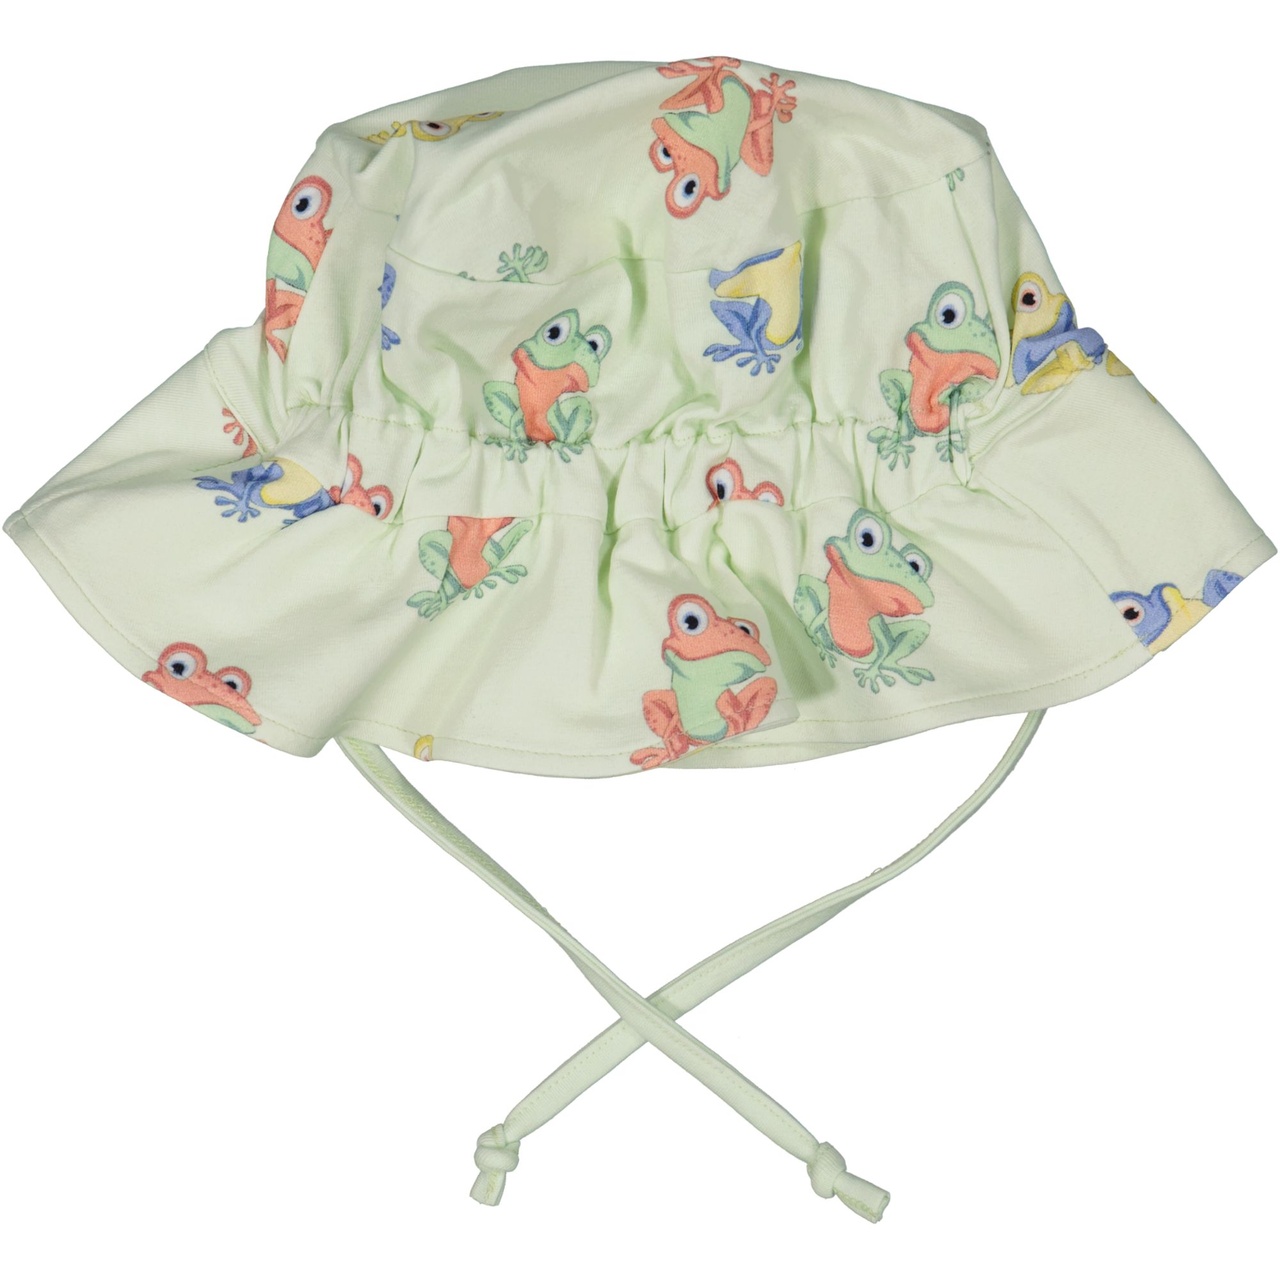 Bamboo Sunny hat Green Frog 10m-2Y